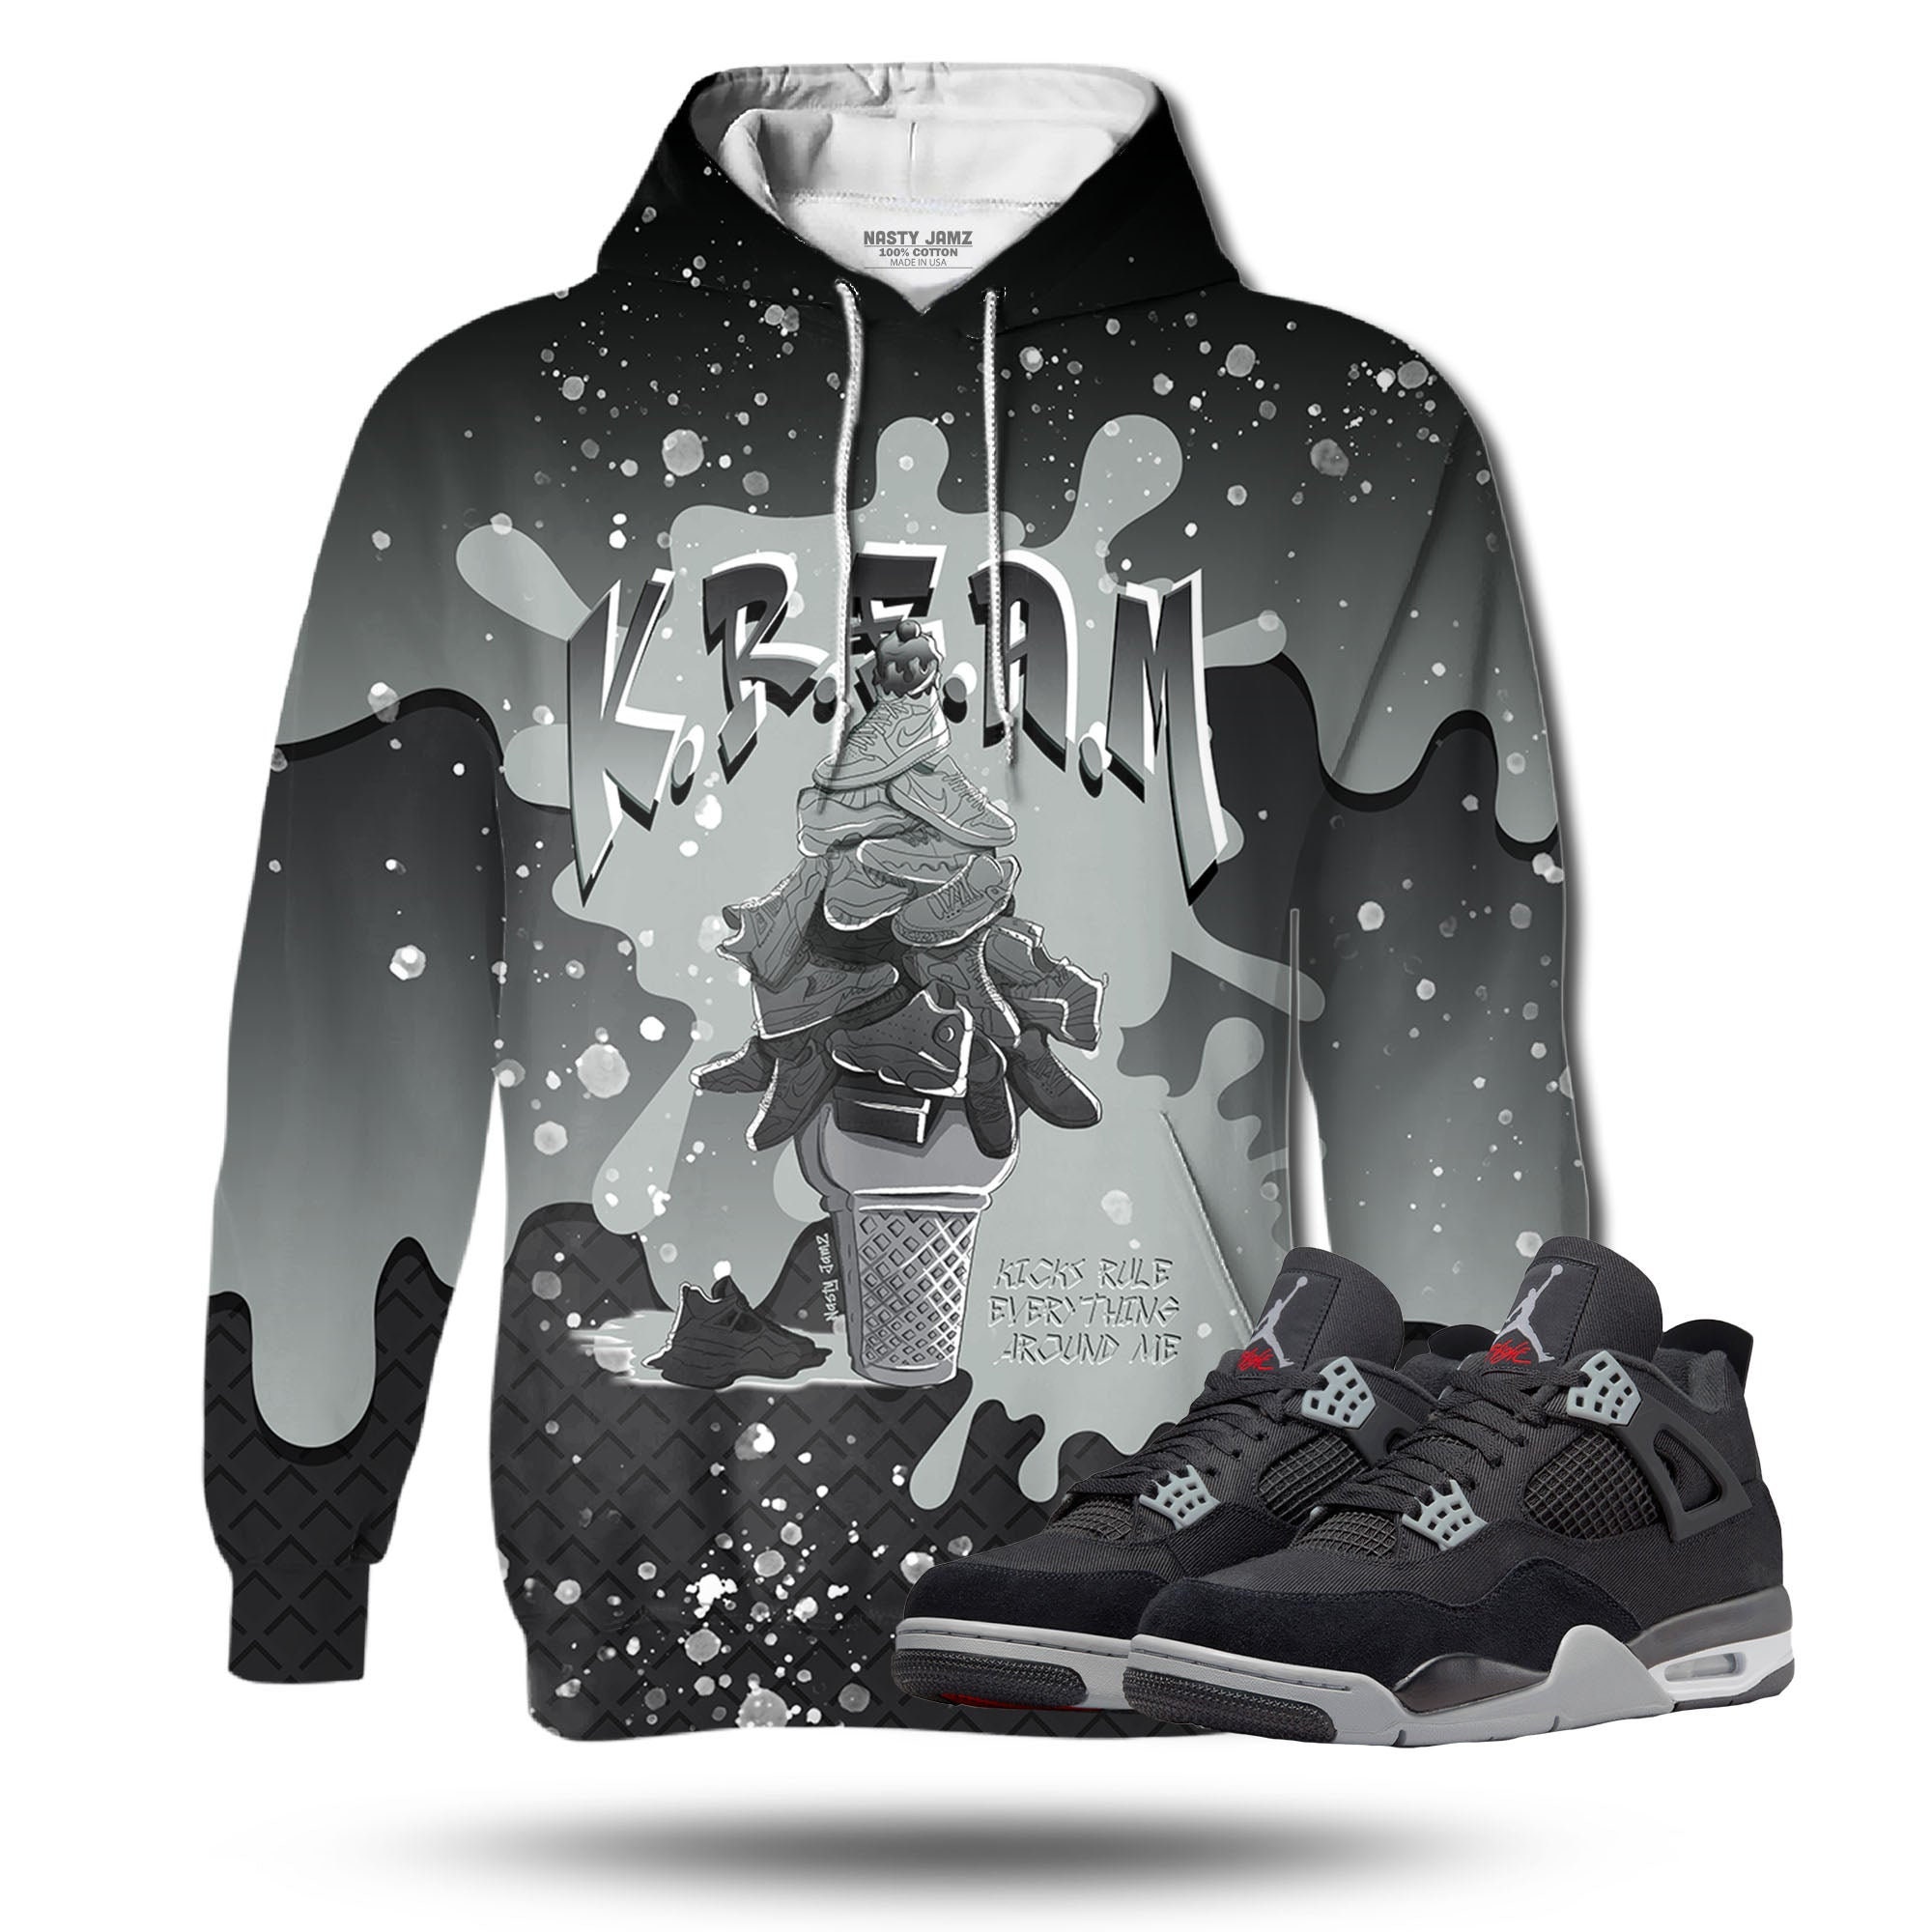 Discover KREAM 3D Waffle Cone Unisex matching Hoodie Jordan 4 Retro Black Canvas outfit match hoodie, oversized hoodie, sneaker match hoodie